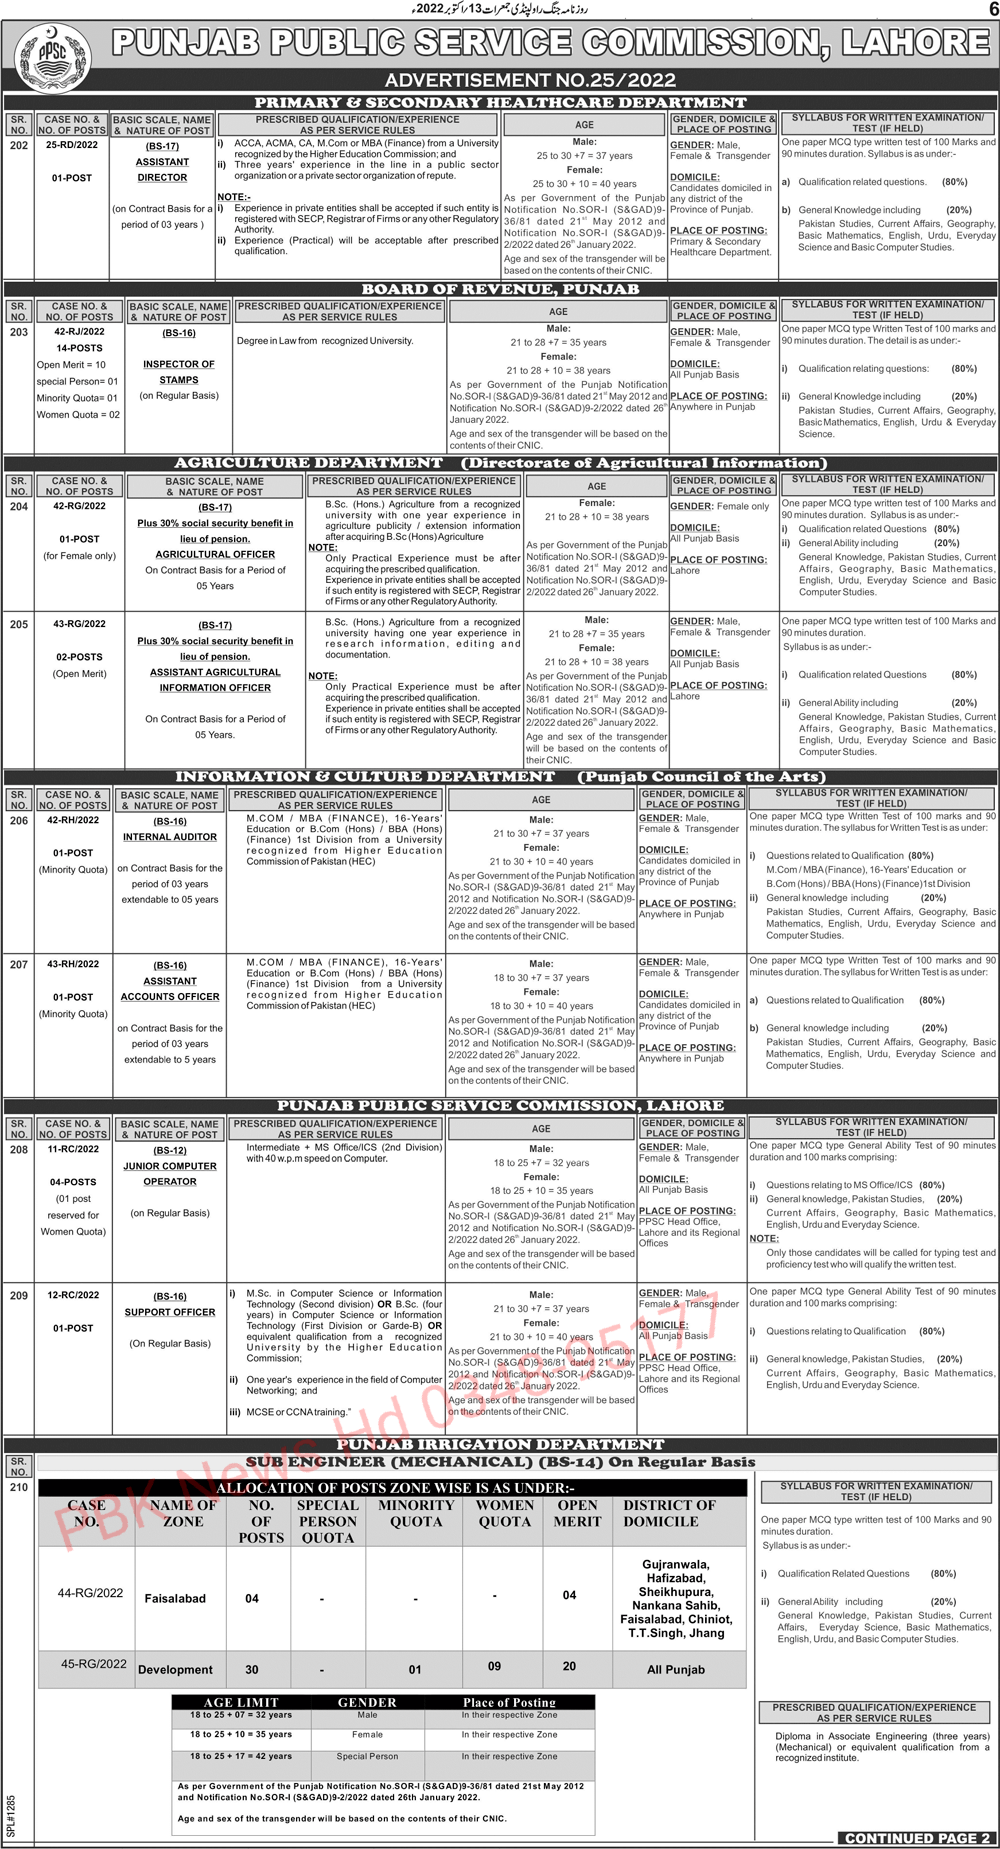 Latest PPSC Vacancies Advertisement BPS-12 to BPS-17